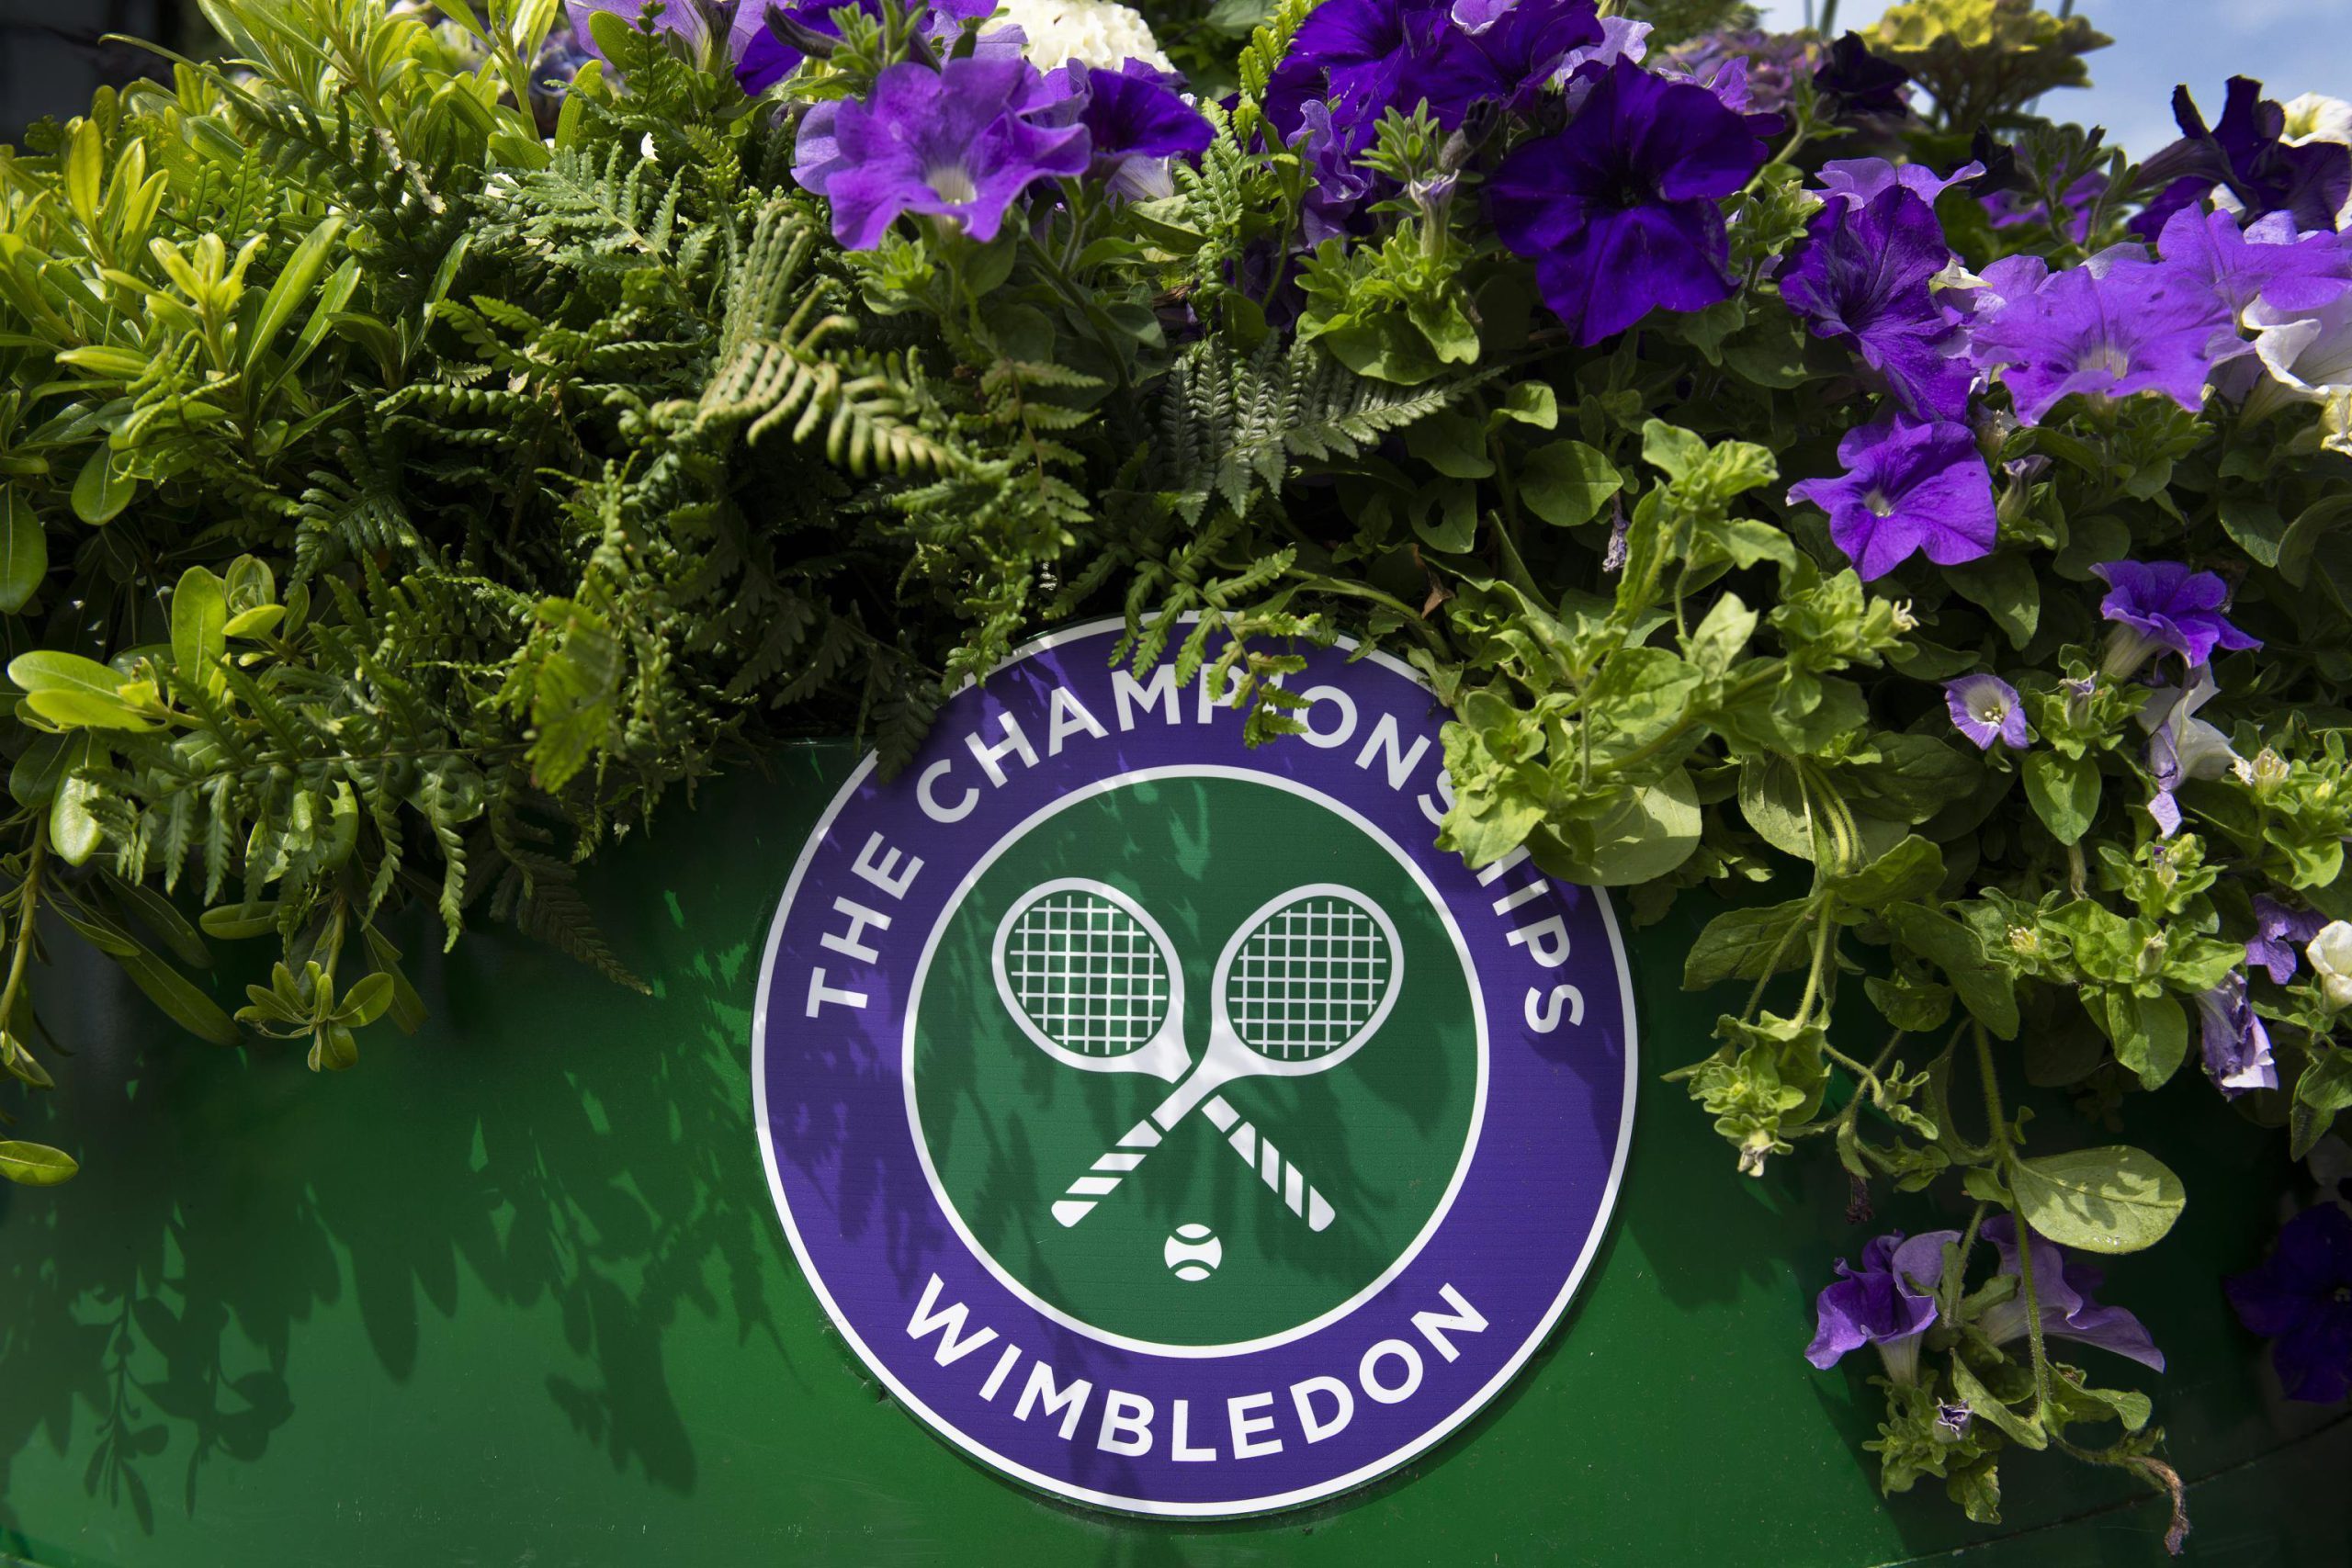 What to wear to Wimbledon and ace your style Alexandra Wood